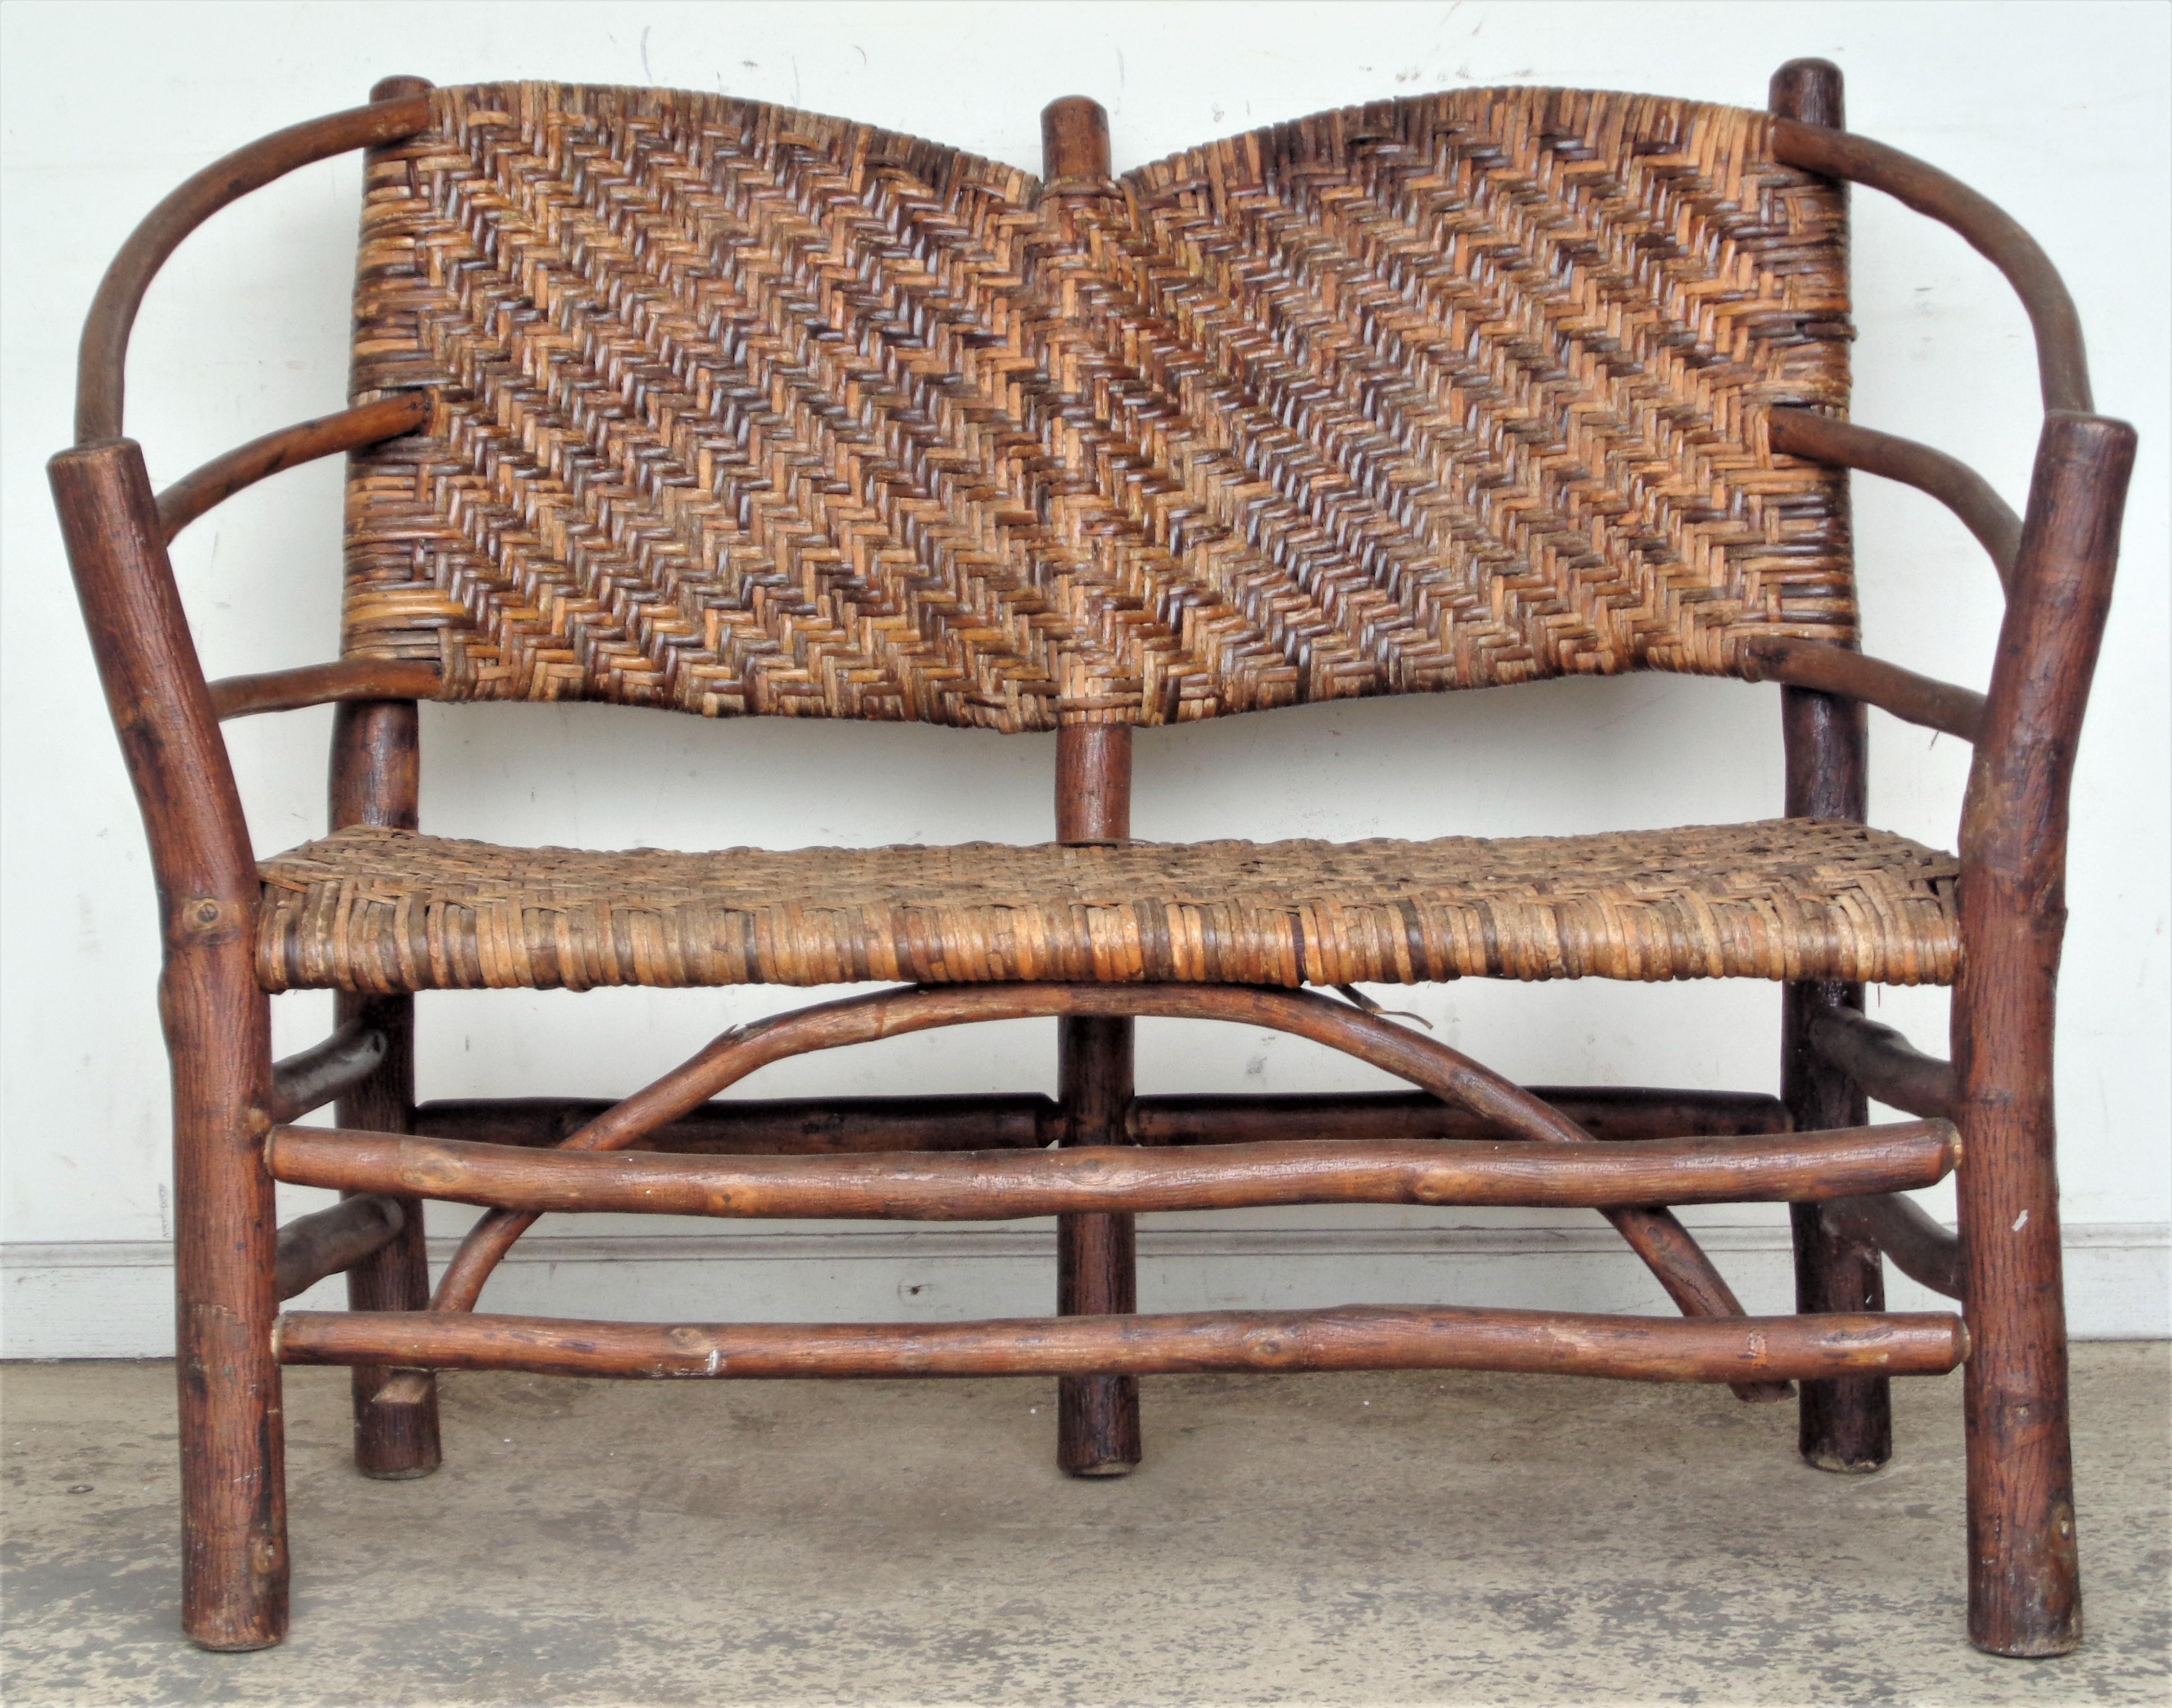 Antique rustic hickory with woven chevron pattern - settee, armchair and rocker in the style of Old Hickory Furniture Company of Martinsville, Indiana ( this set is not signed ) All three pieces are in very good all original condition, structurally